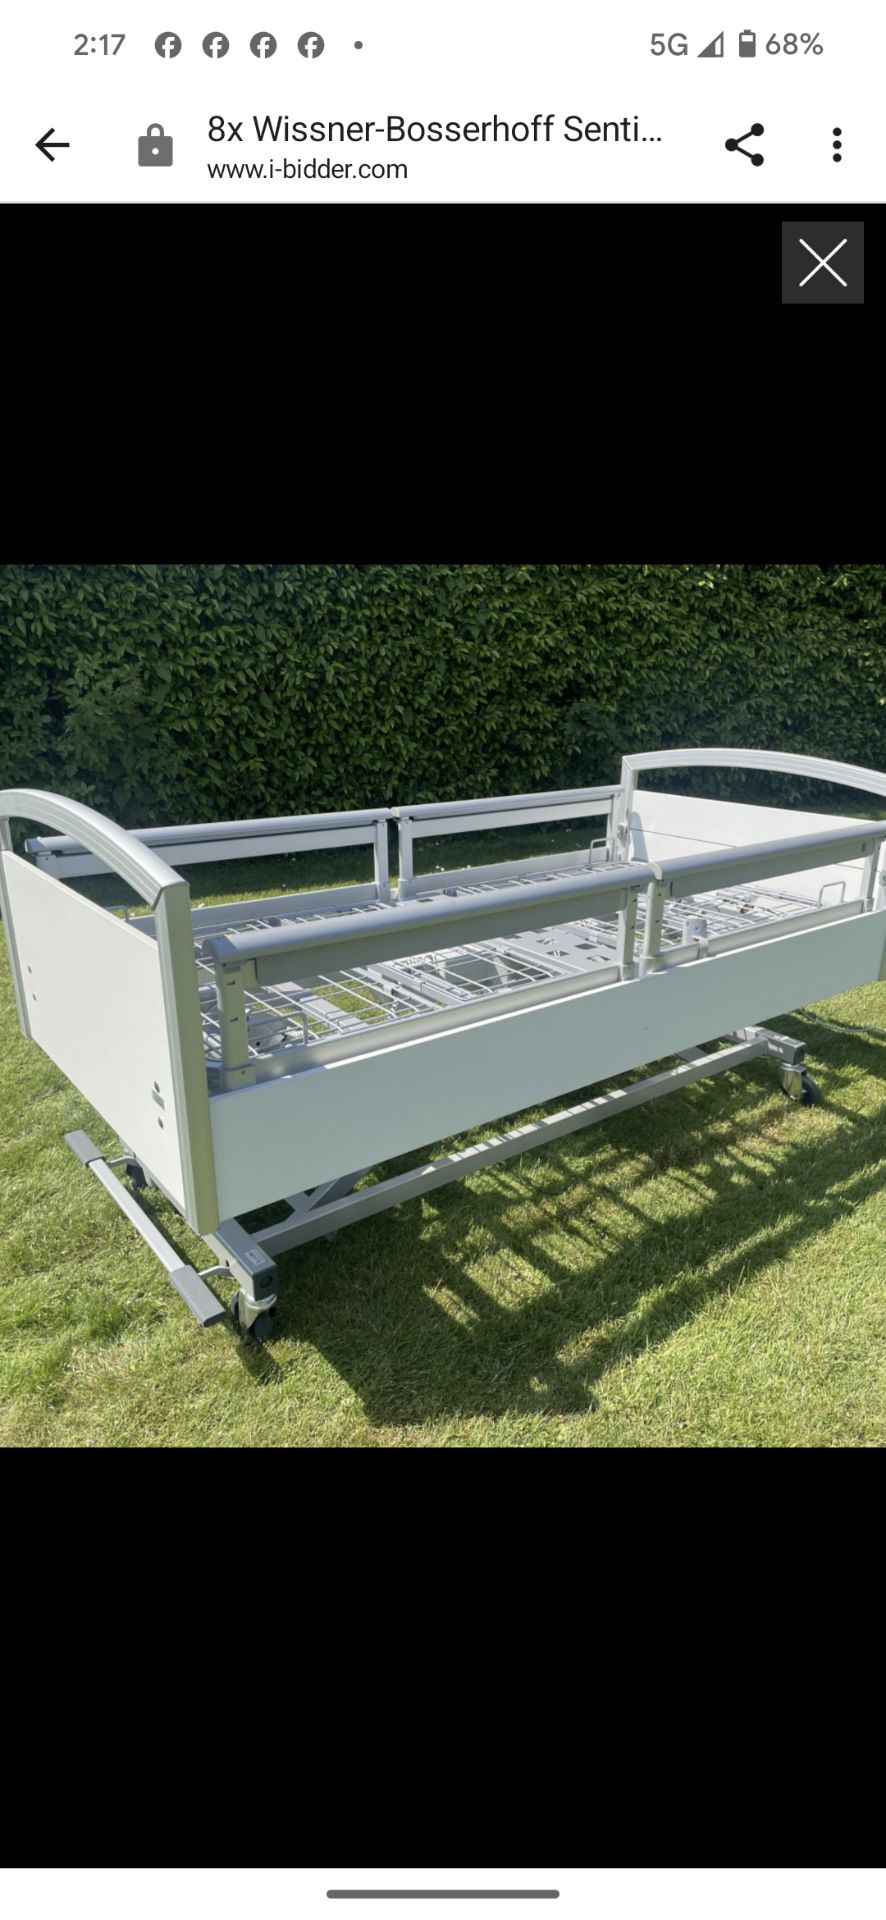 2 X WISSNER BOSSAHOFF ADJUSTABLE ELECTRIC HOSPITAL BEDS WITH ARGYL II DYNAMIC AIRFLOW MATTRESSES